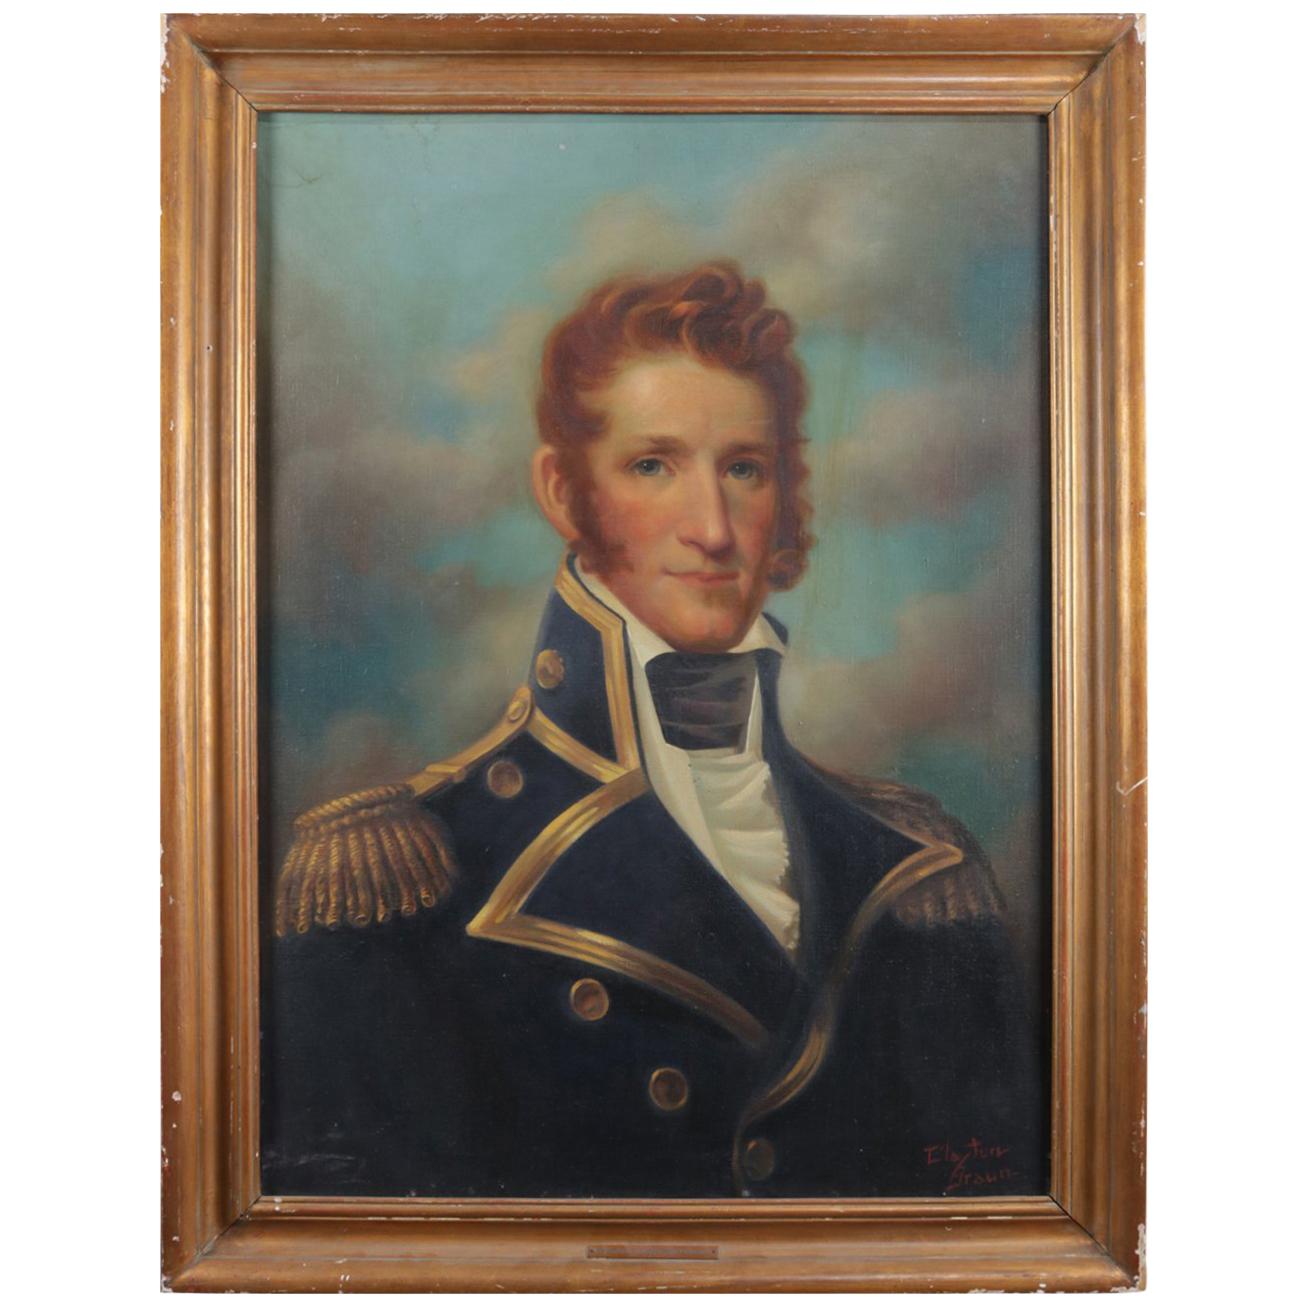 Oil on Canvas Portrait Painting of Commodore McDonough by Clayton Braun